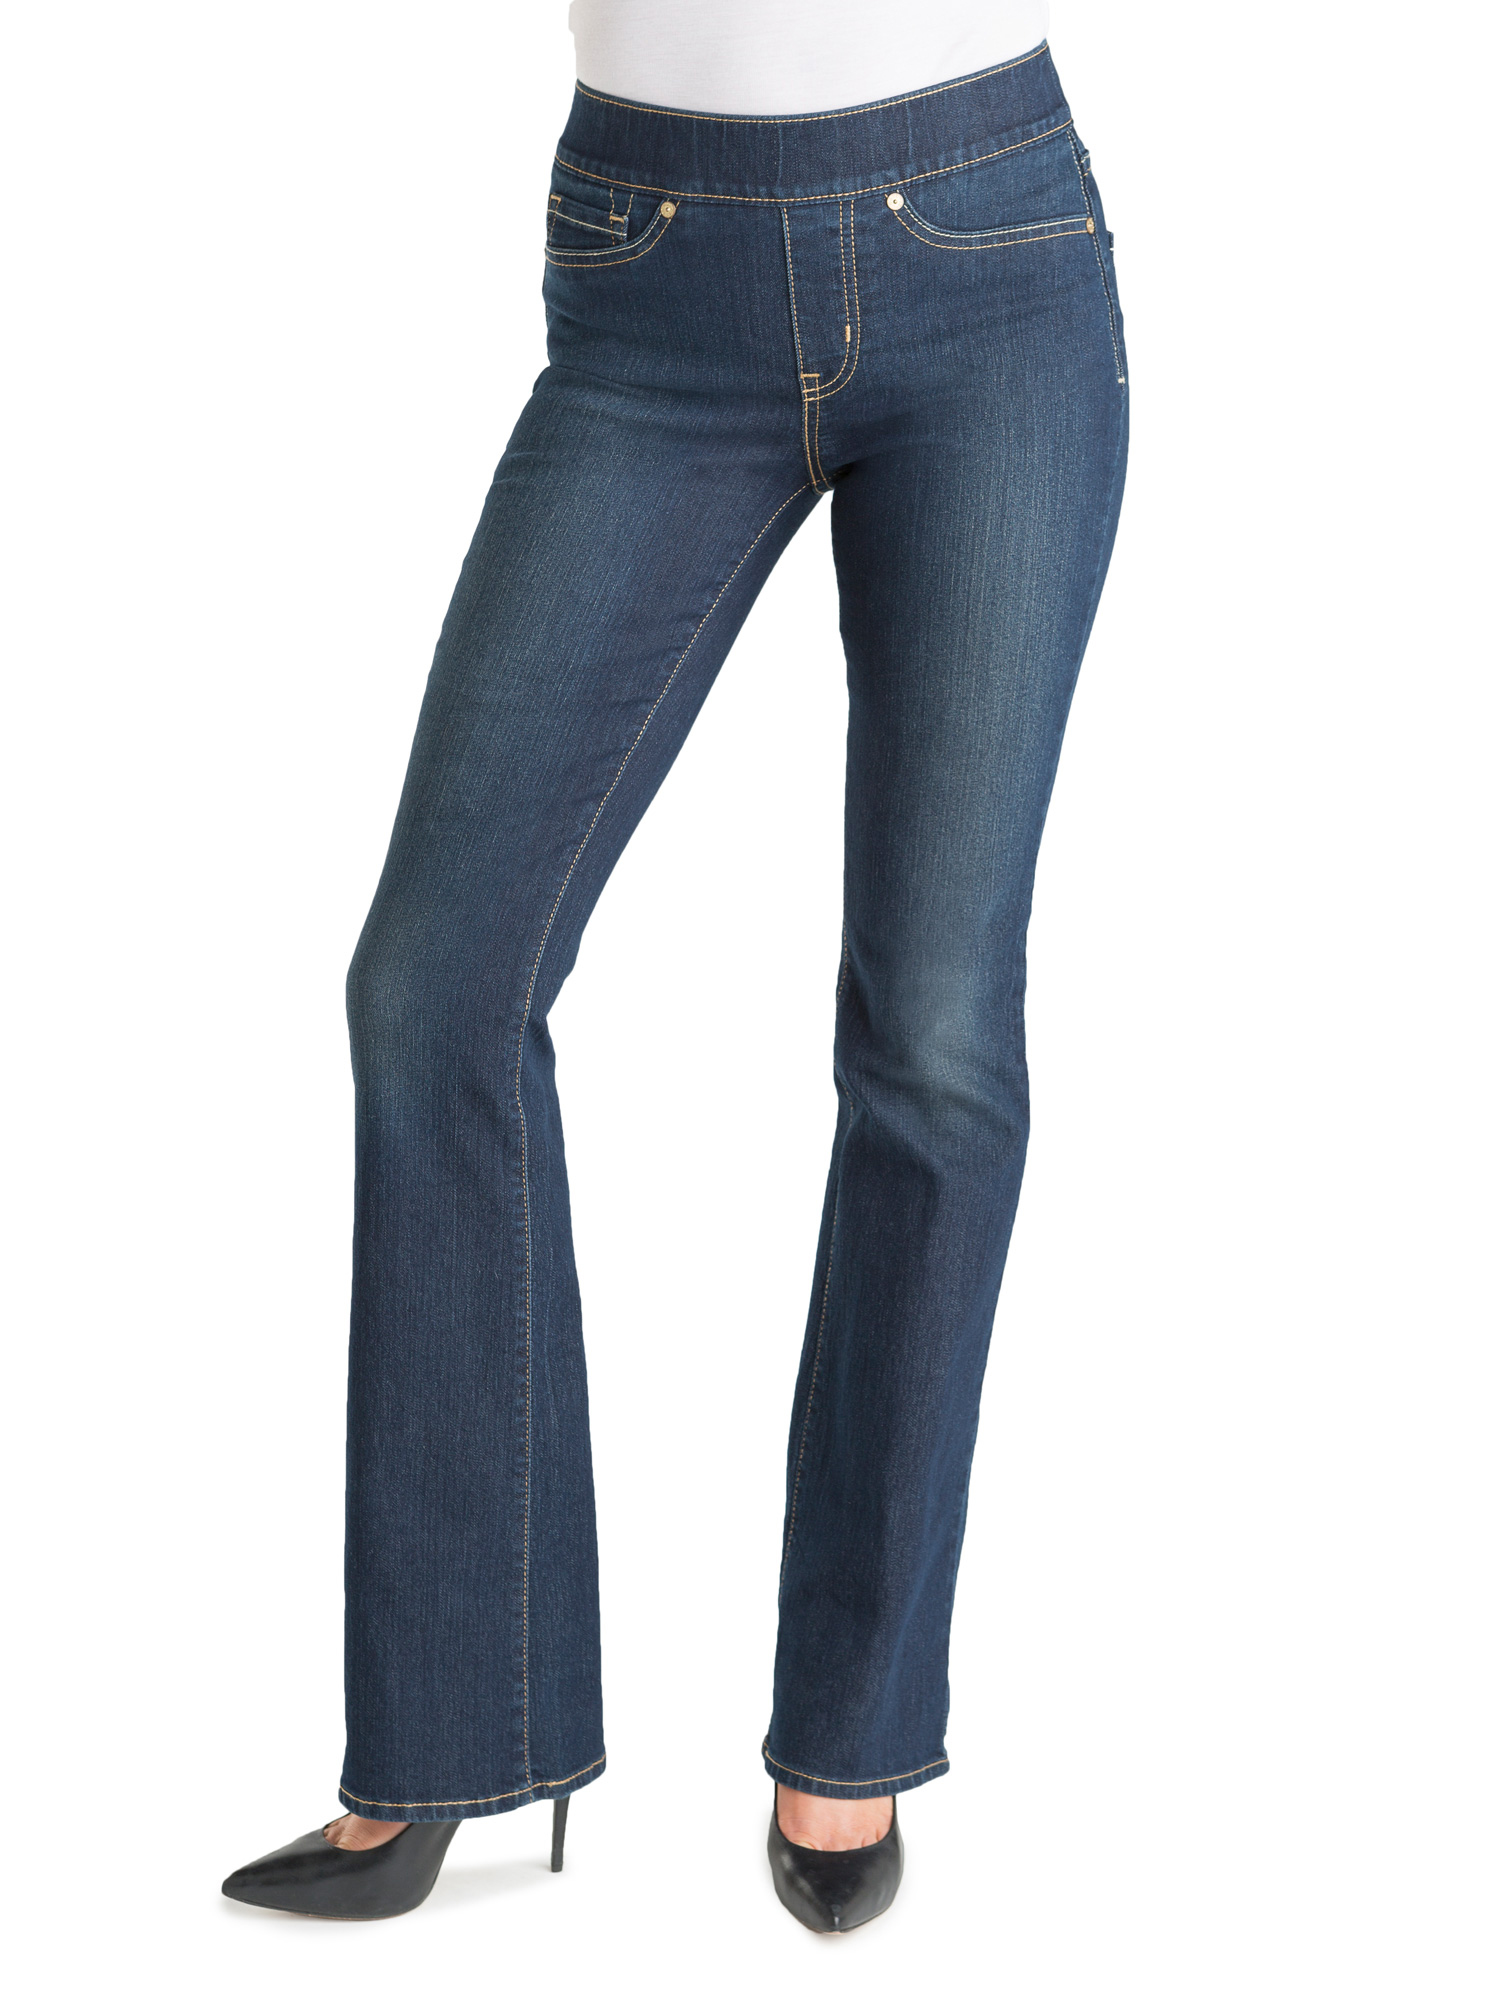 Signature by Levi Strauss & Co. Women's Totally Shaping Pull On Bootcut Jeans - image 1 of 3